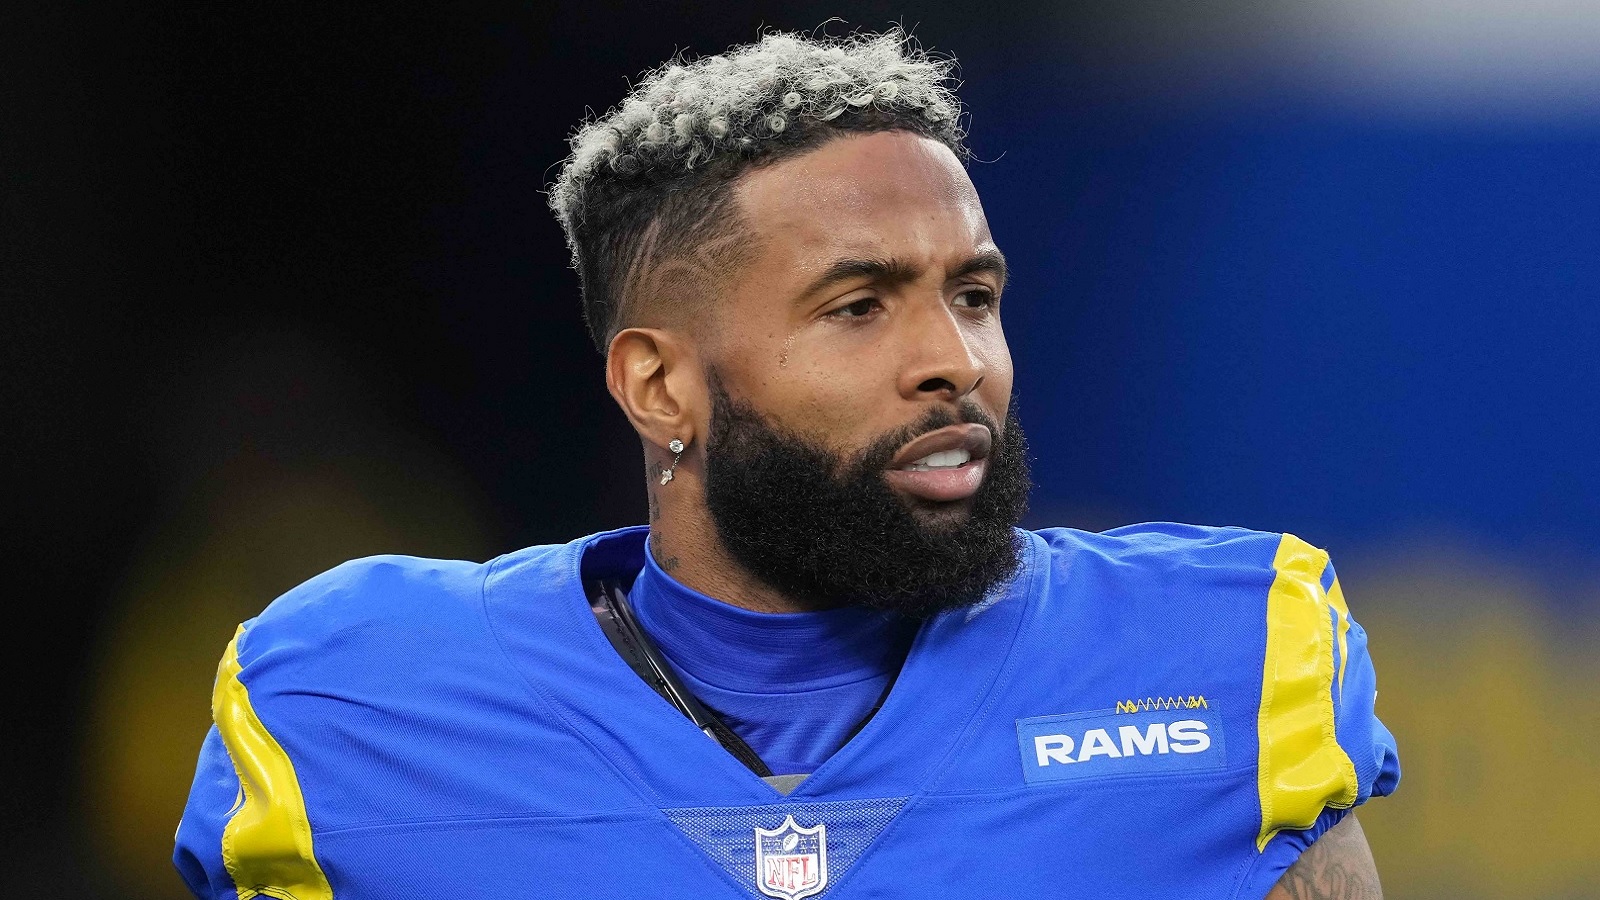 Hall of Fame WR claims Odell Beckham Jr. will leave Rams to sign